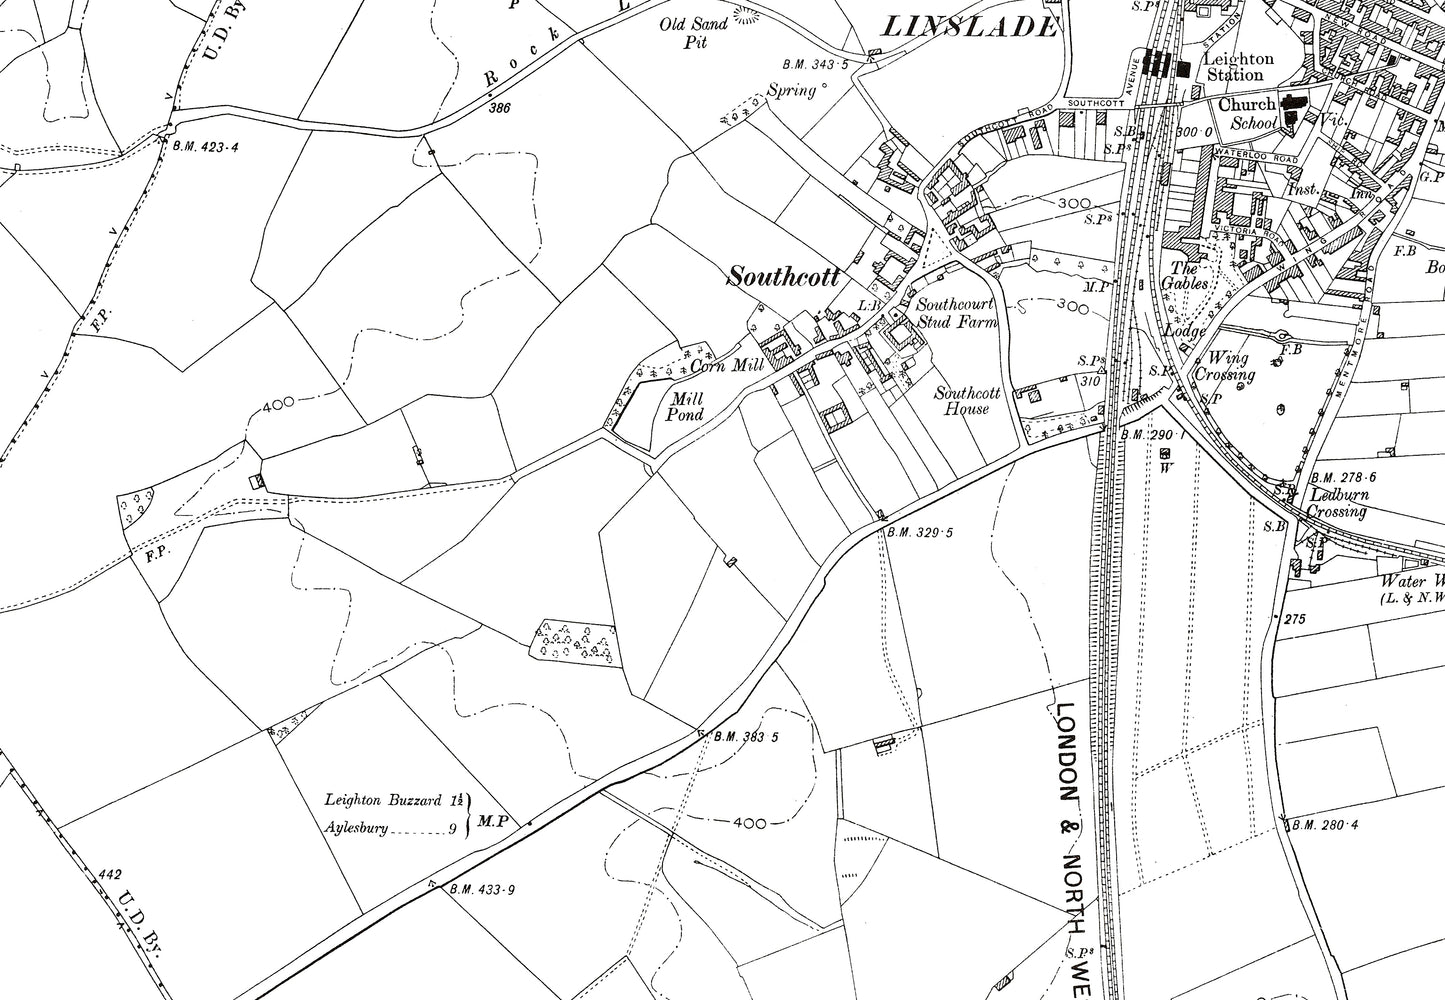 A 1902 map showing Leighton Buzzard in Bedfordshire, plus Linslade, Bucks - A Digital Download 0f OS 1:10560 scale map, Beds 28SW